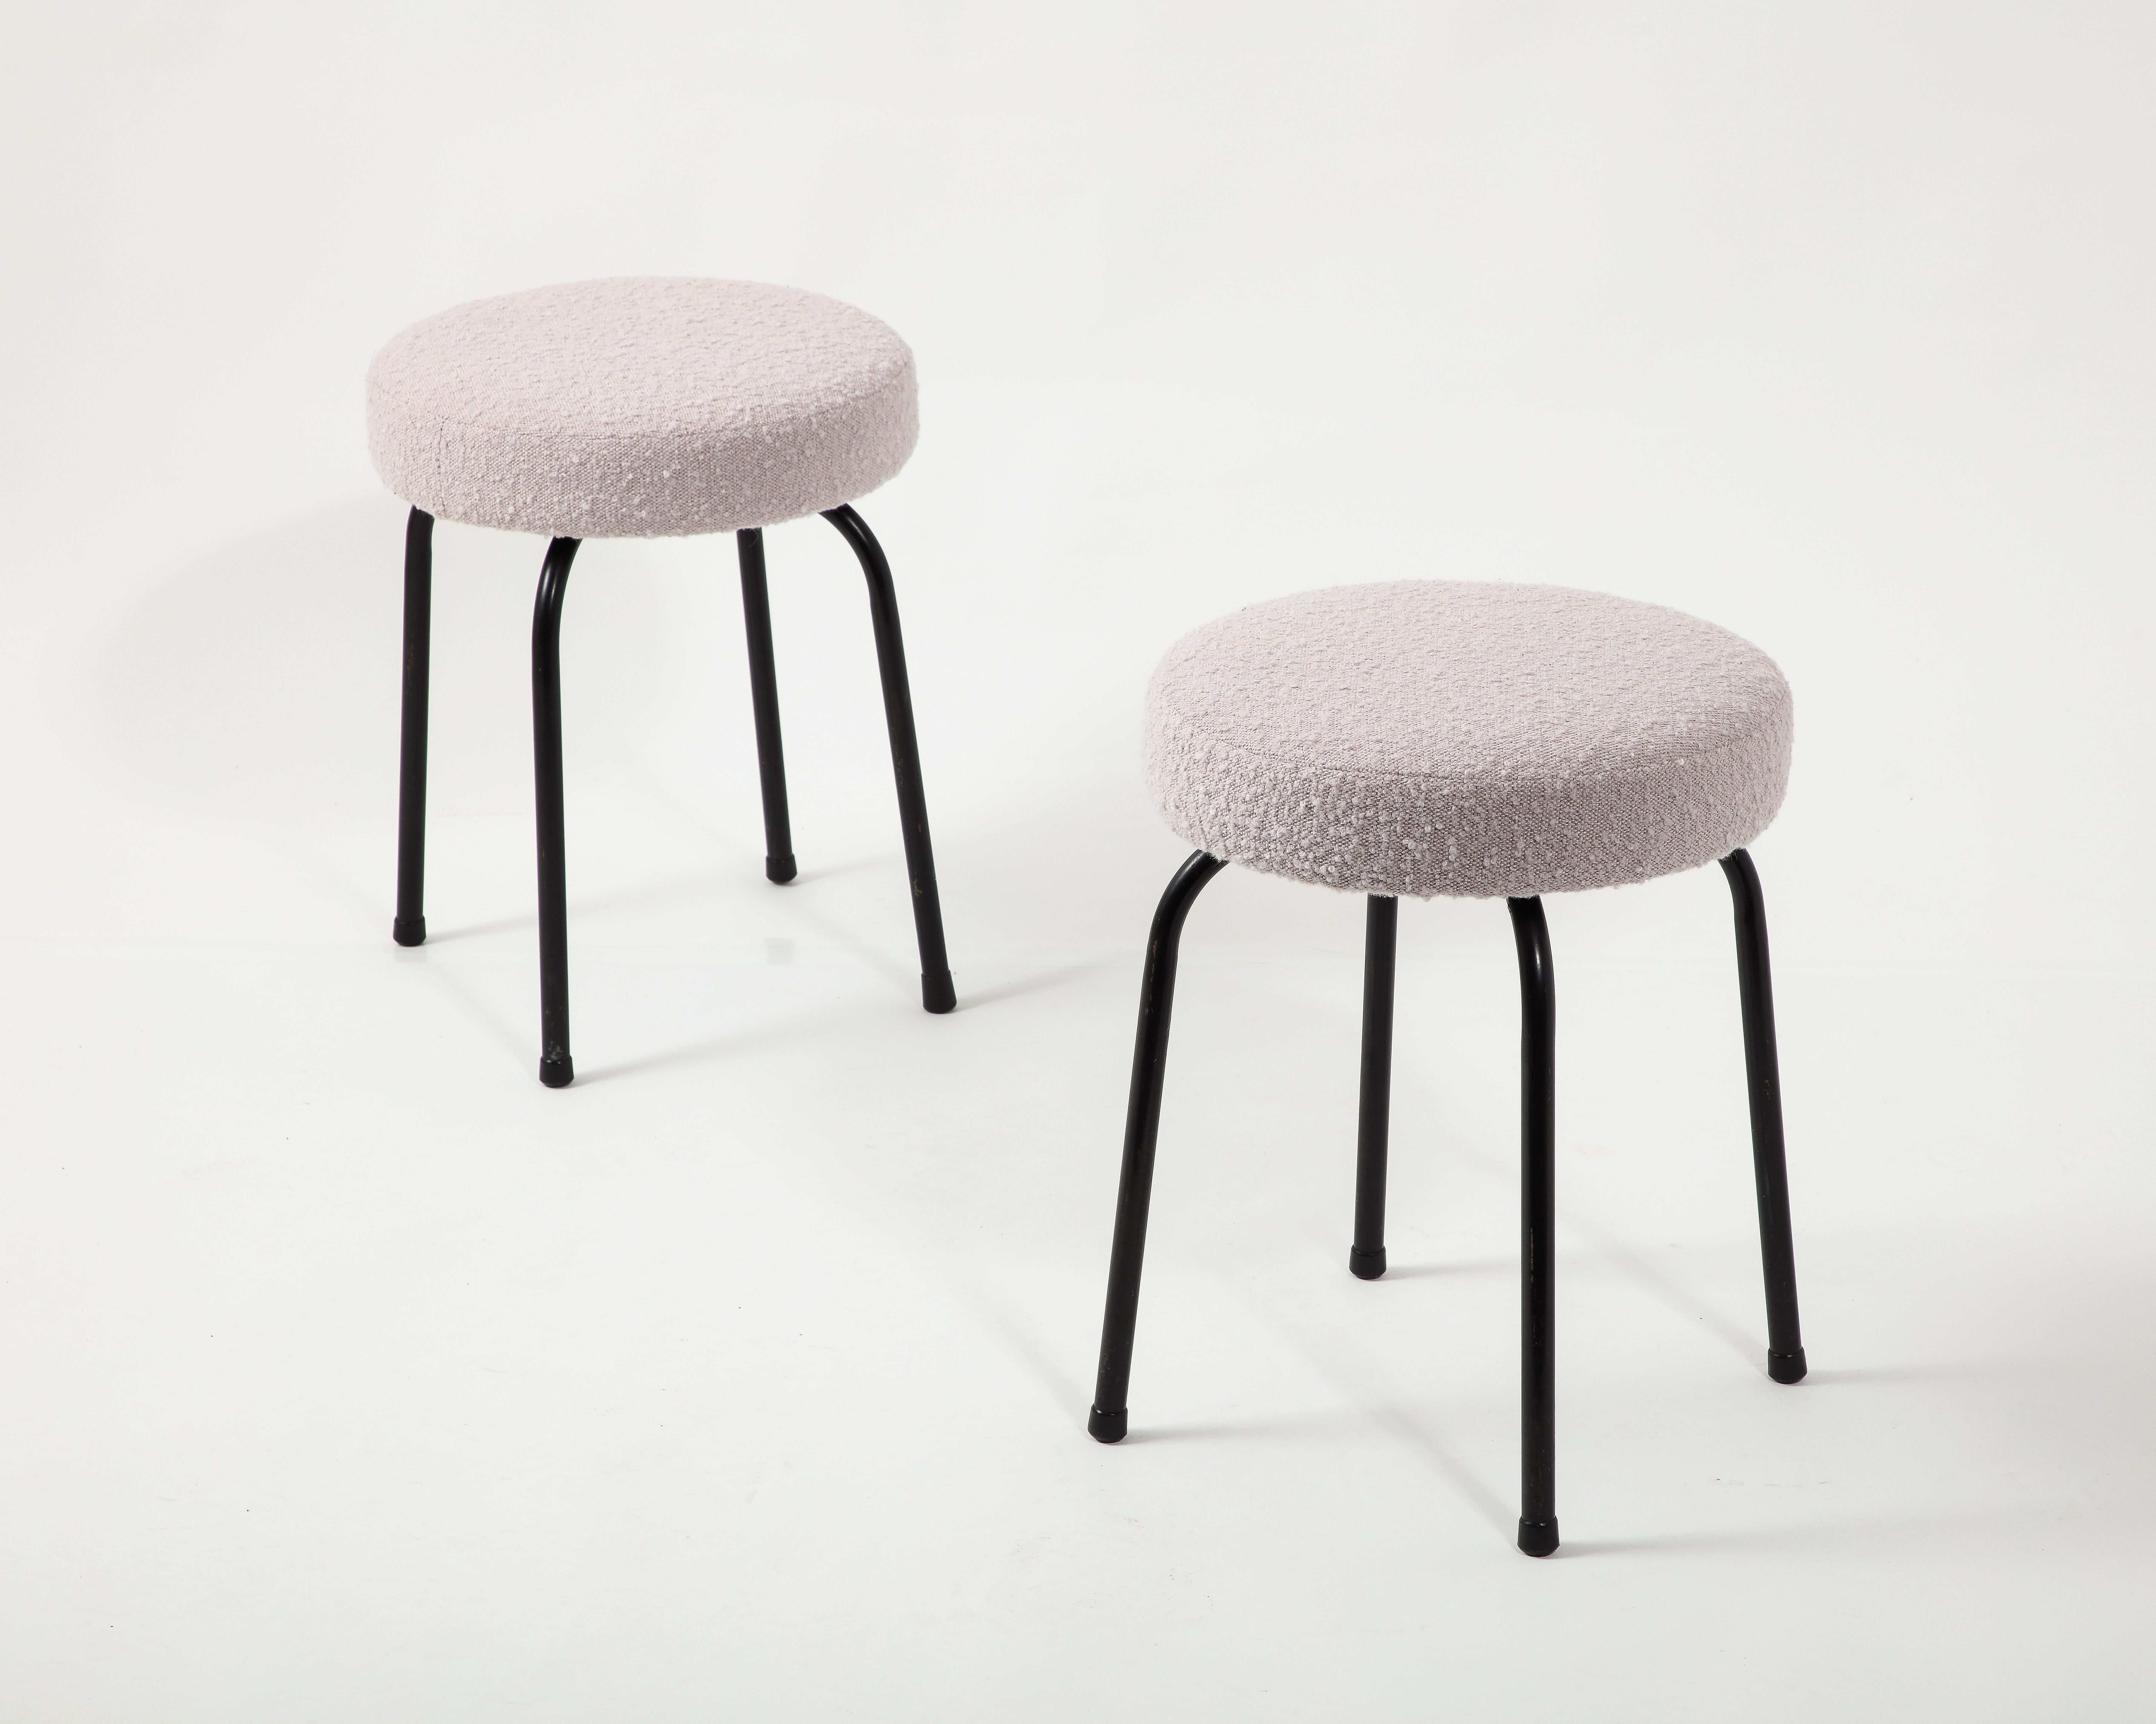 Pair of Boucle & Black Steel Stools, France 1950's For Sale 4